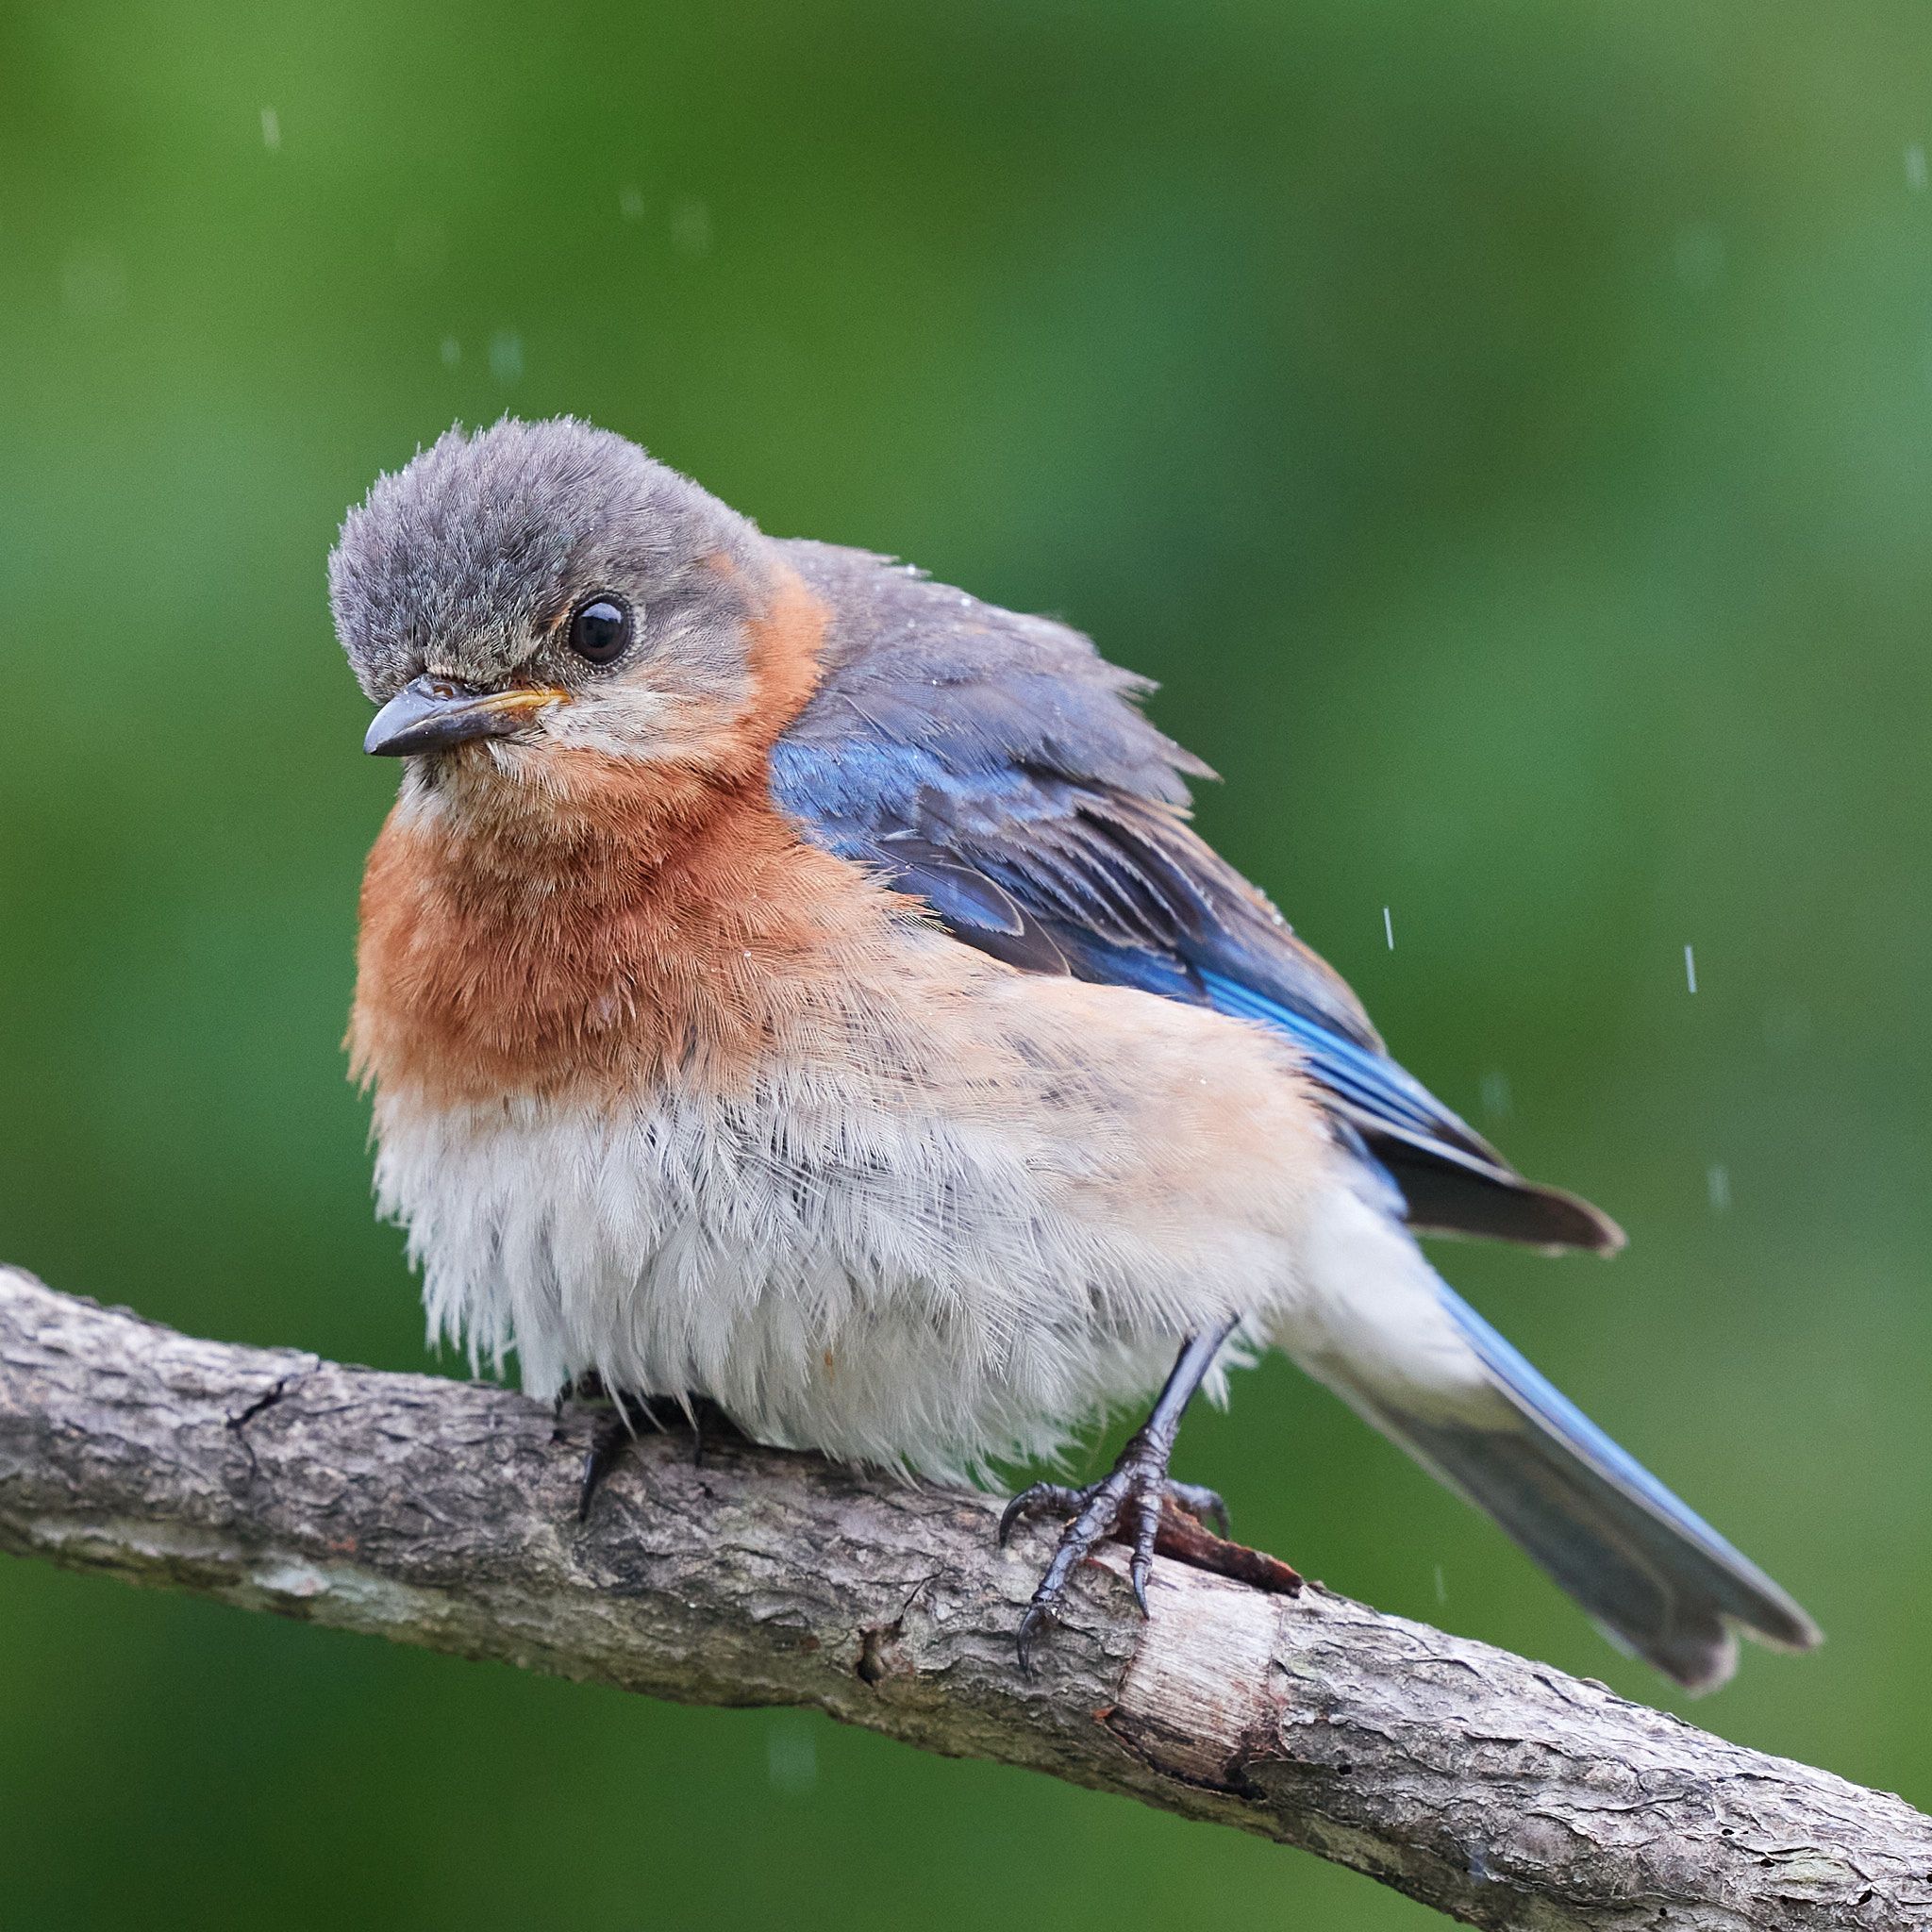 A bluebird sits in the rain, fluffed for comfort, and brightening the day.